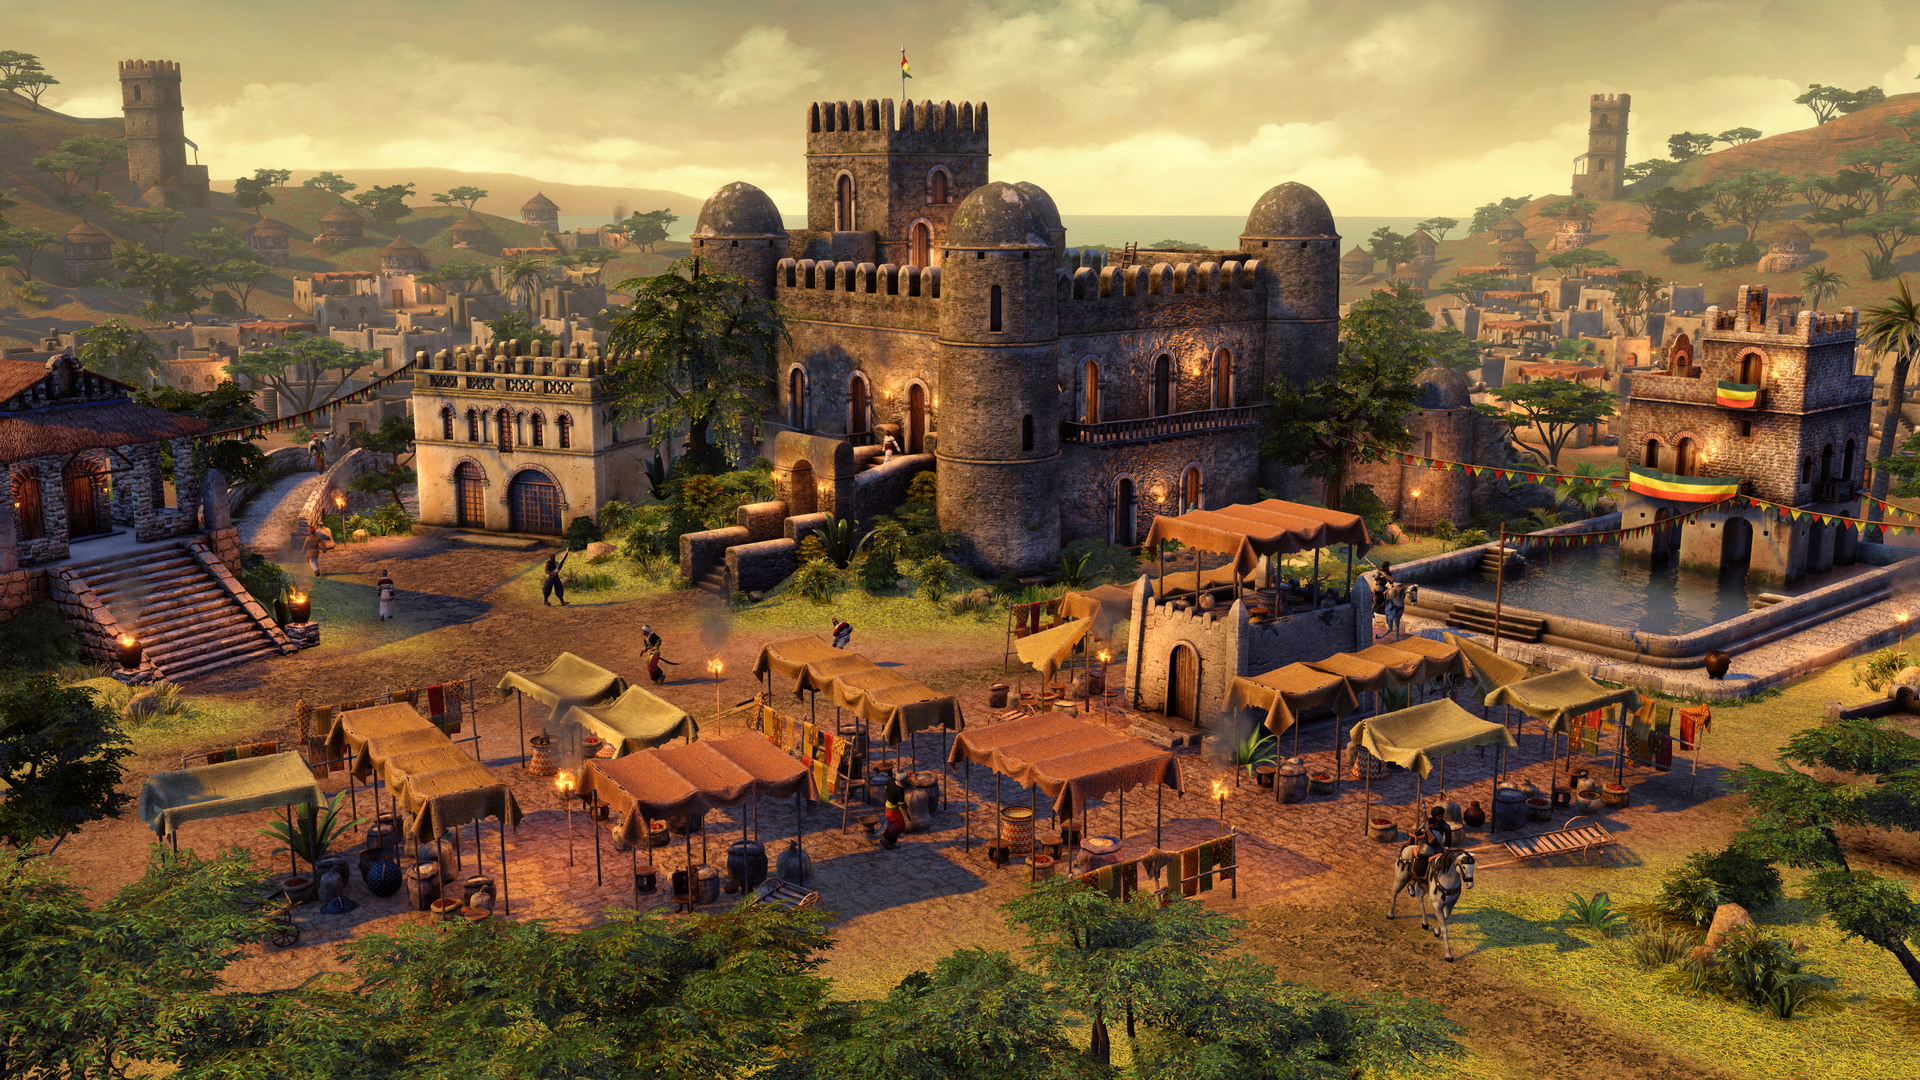 Age of Empires III: Definitive Edition - The African Royals - screenshot 7